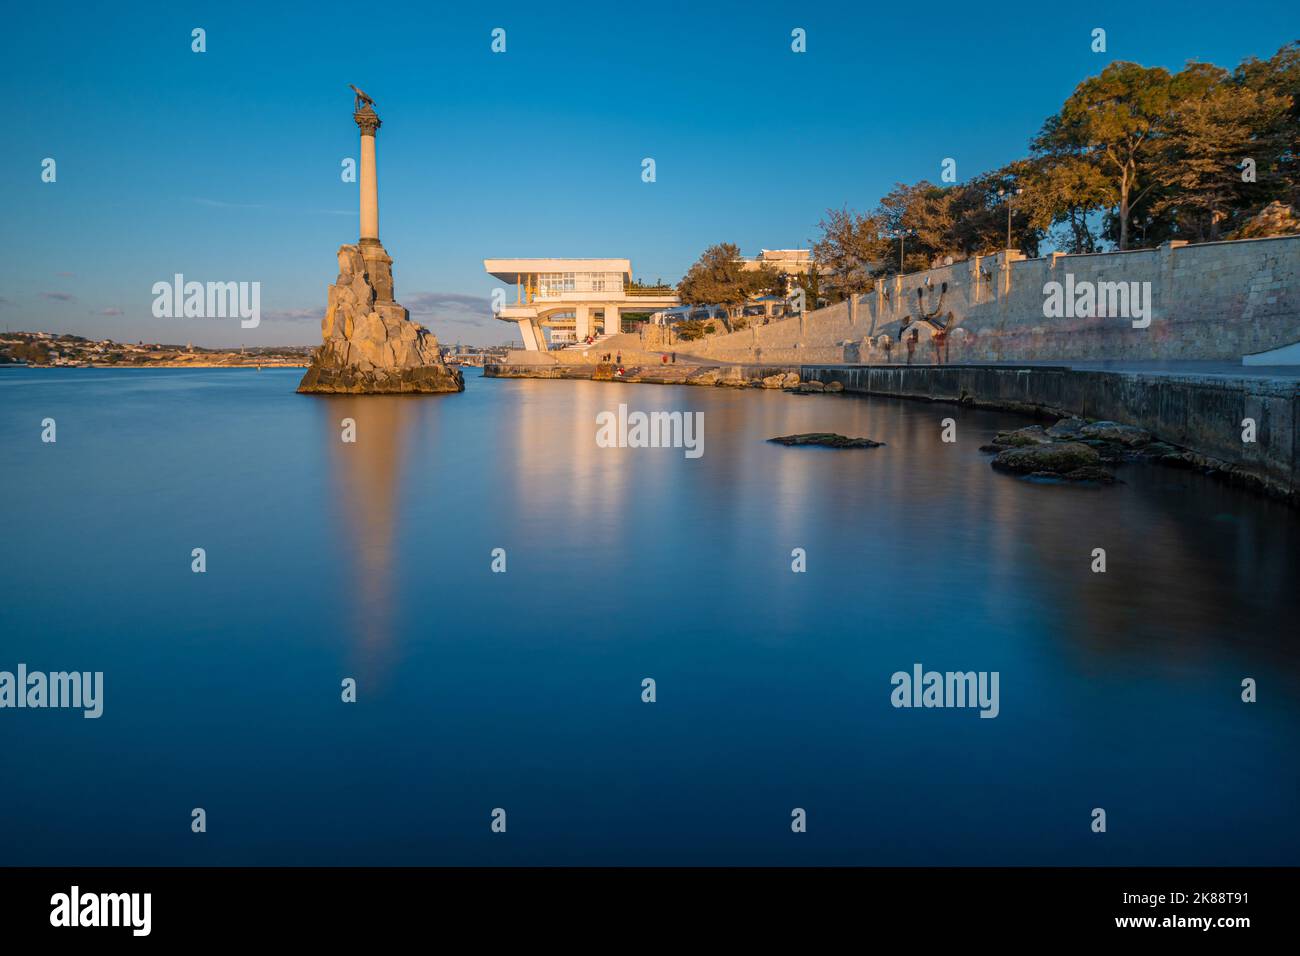 Monument to the scuttled ships at sunset. Sevastopol, Russia. Long exposure, smooth sea Stock Photo